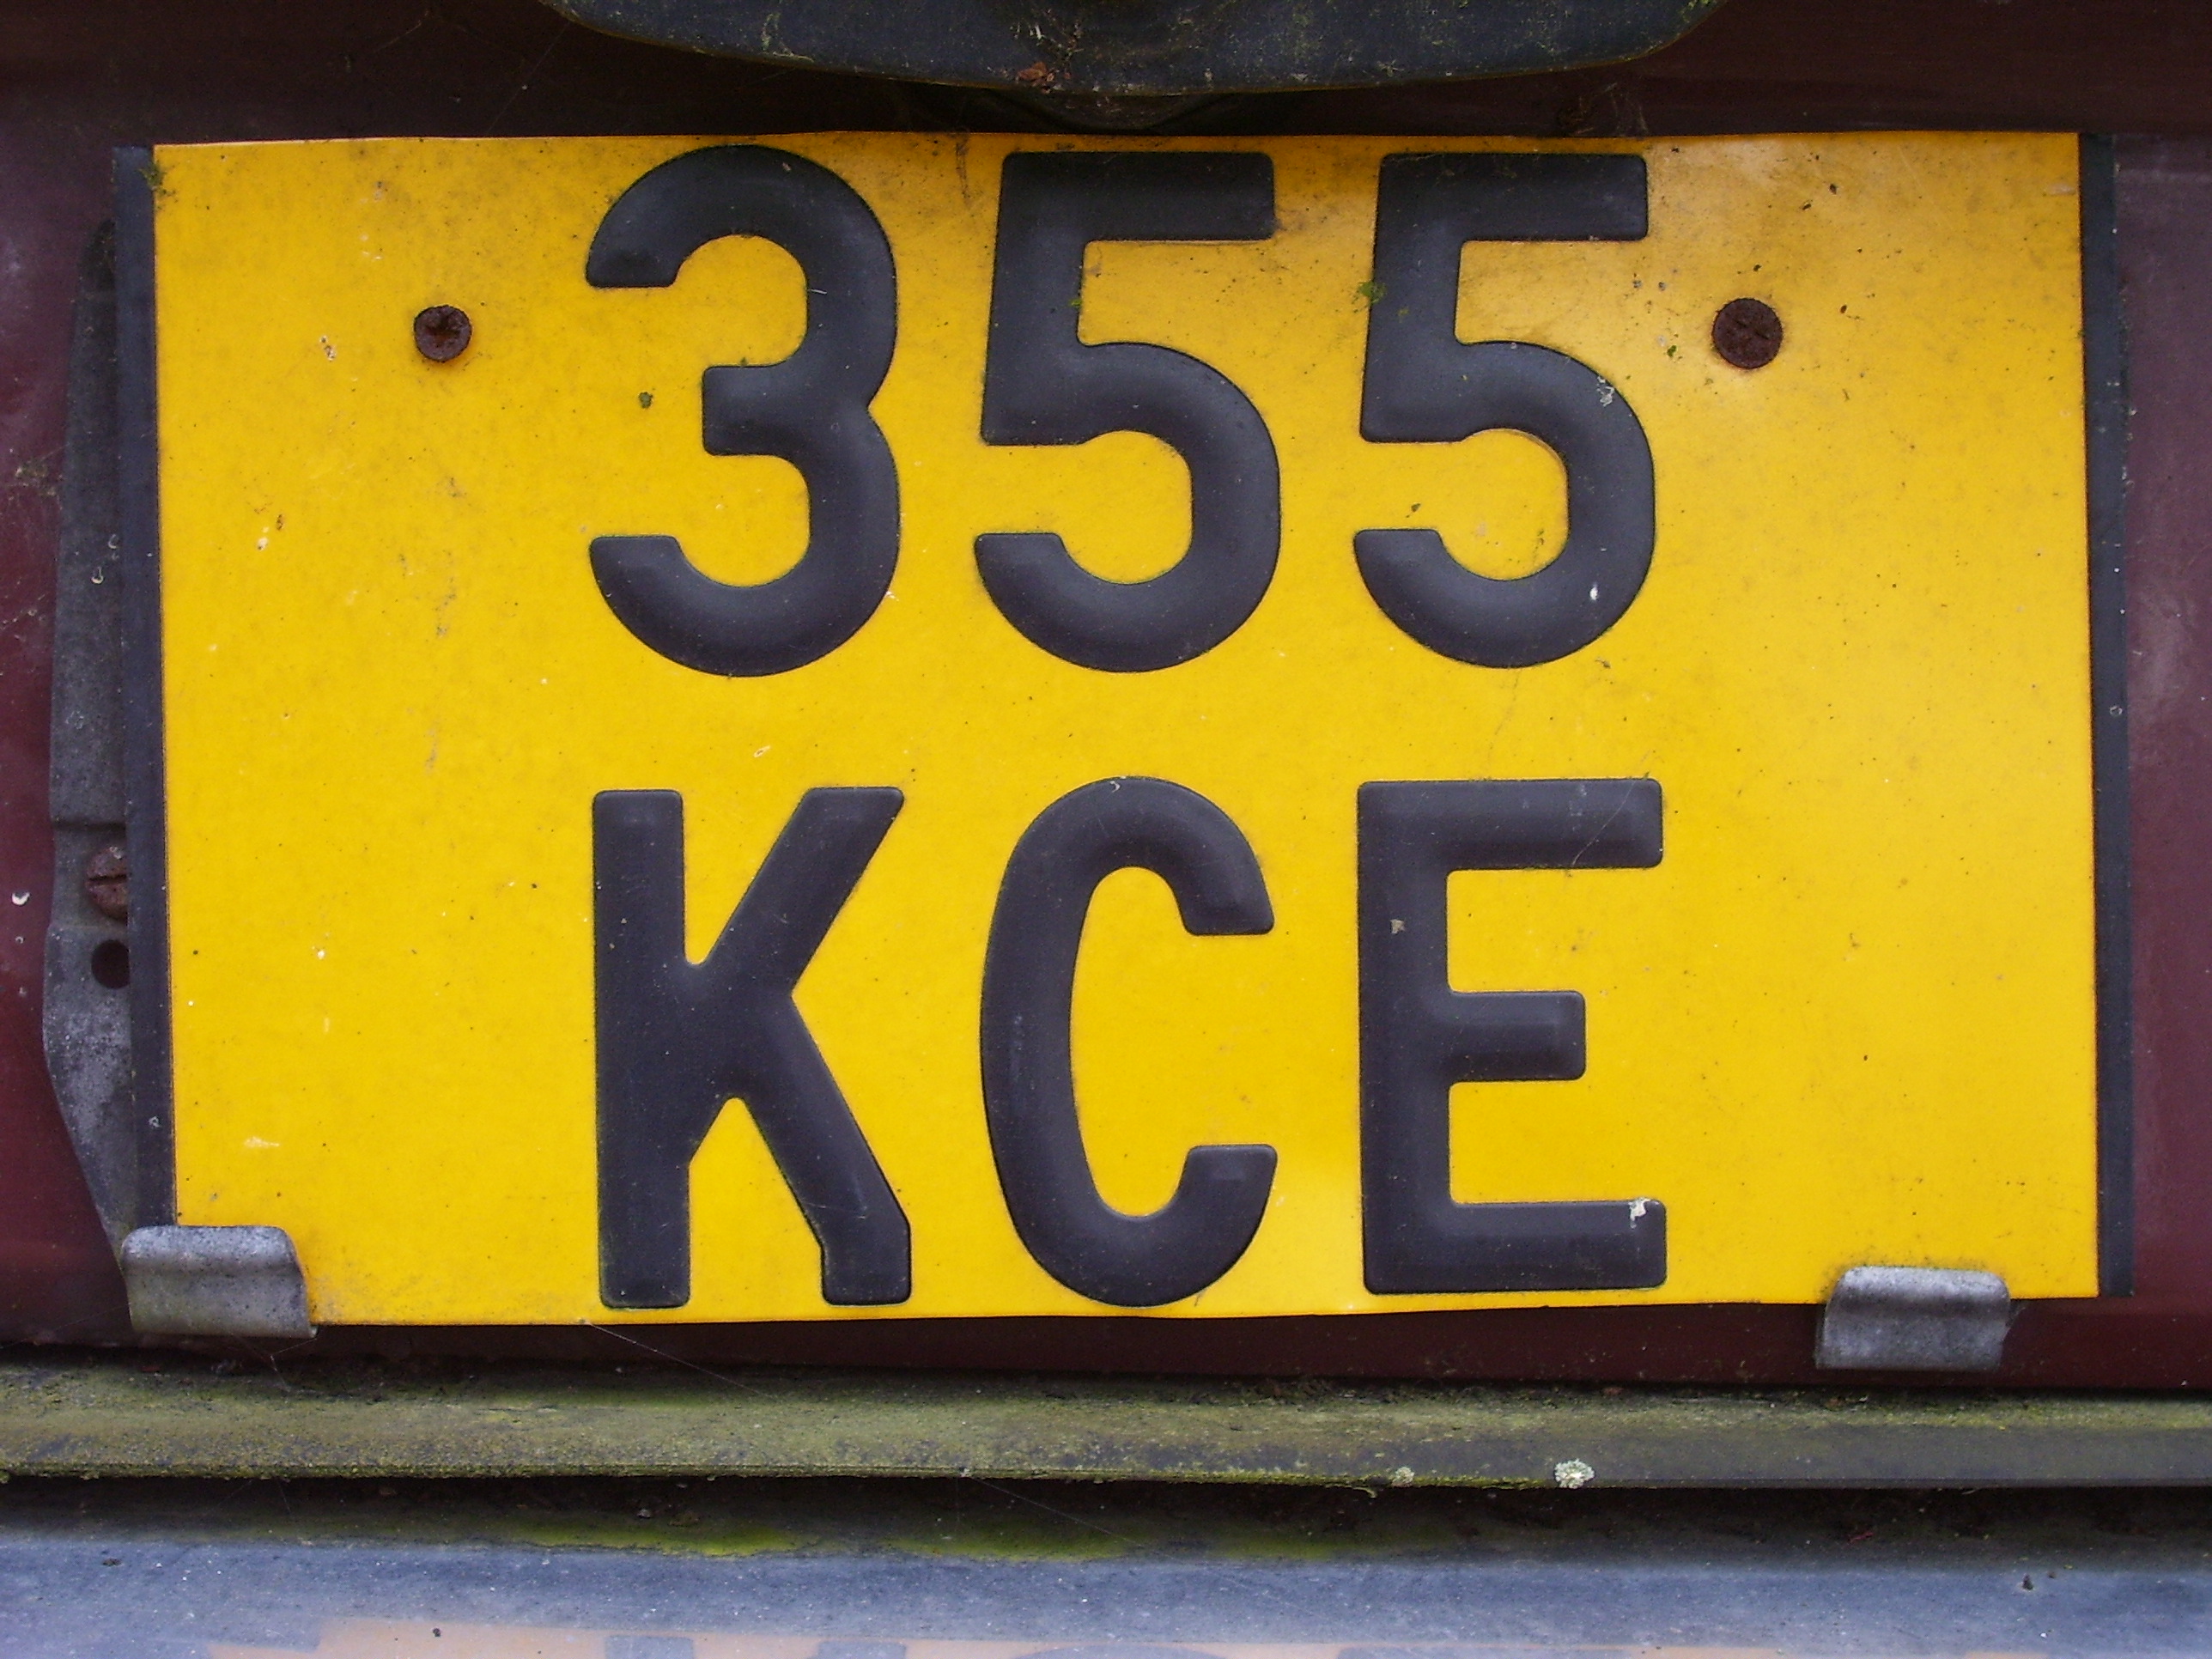 makkes number plate licence yellow black letters numbers